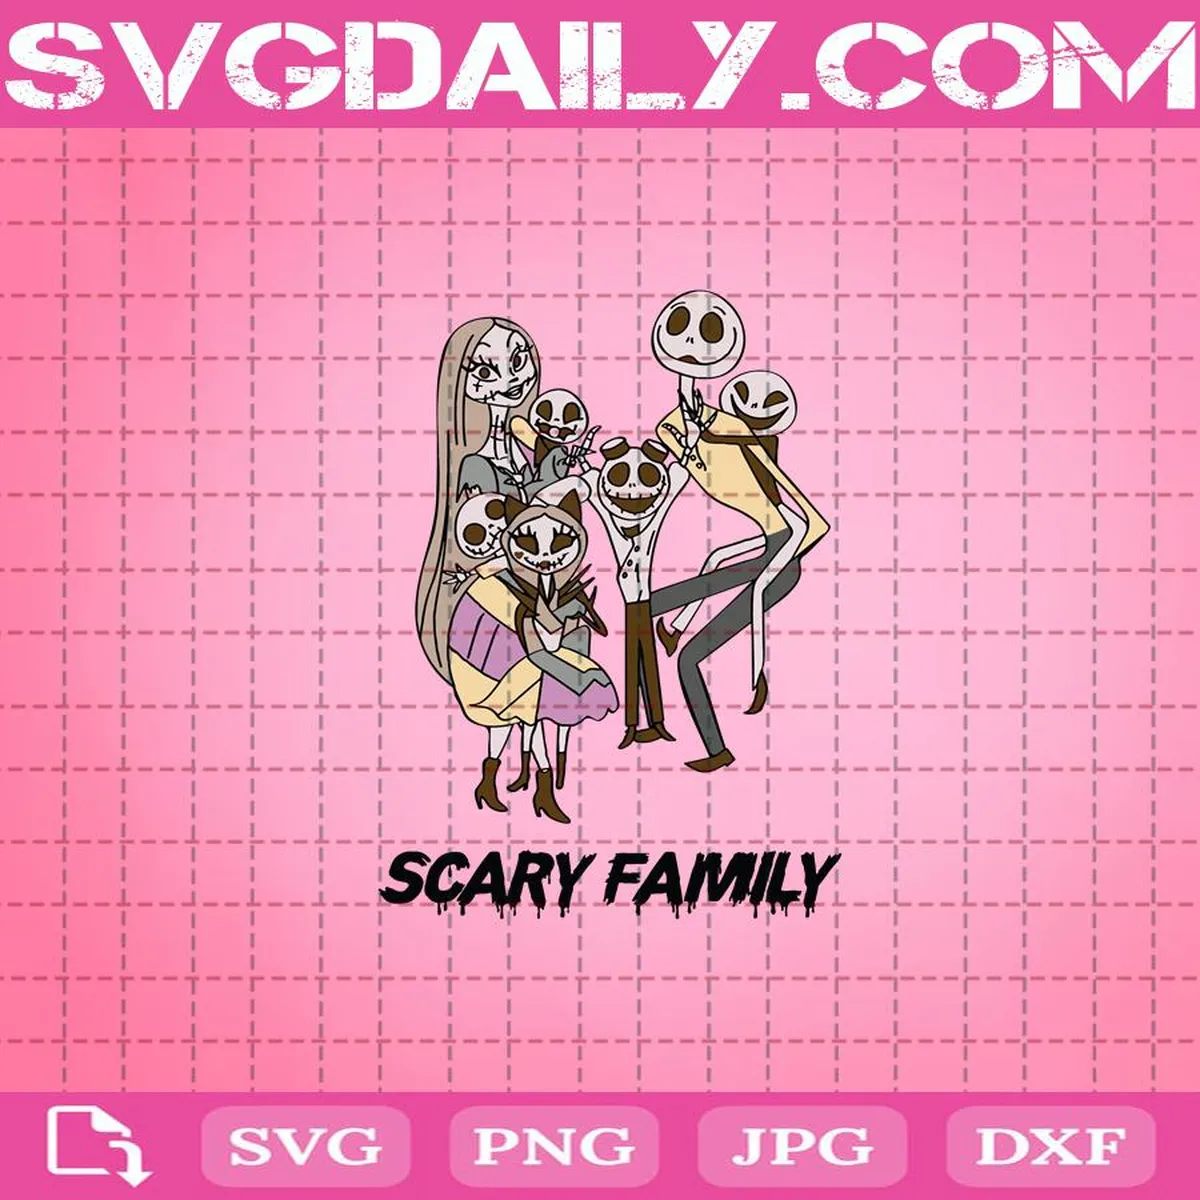 Jack Skellington And Sally Family Svg, Scary Family Svg, The Nightmare Before Christmas Svg, Halloween Svg